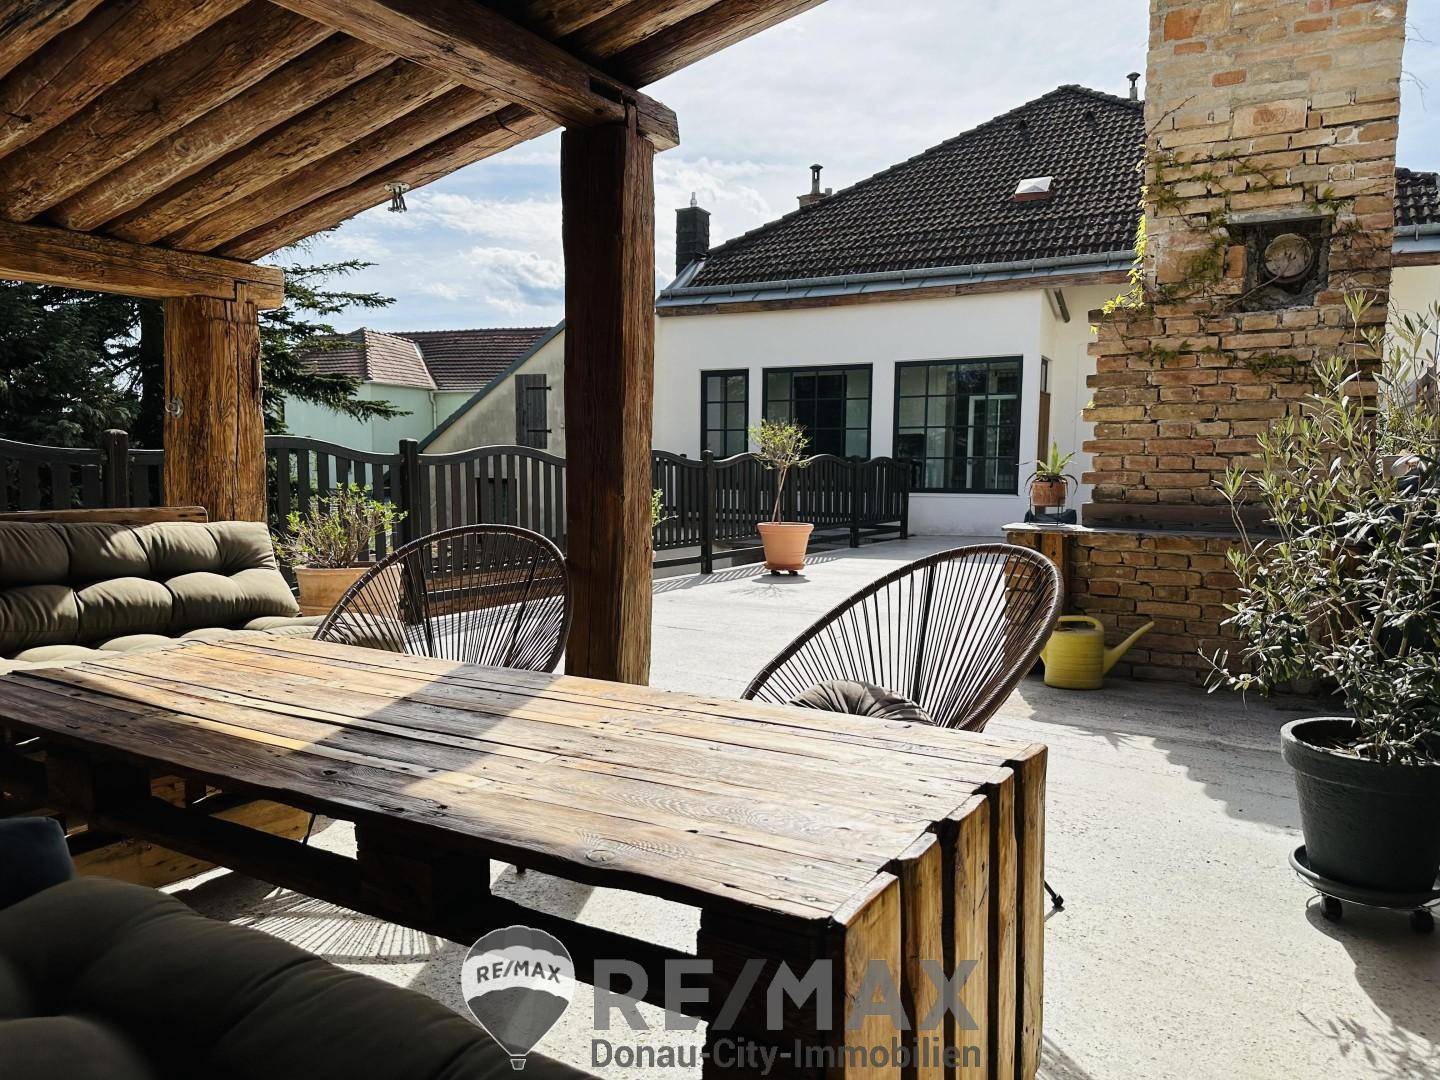 19. Dachterrasse mit Chill-out-Lounge